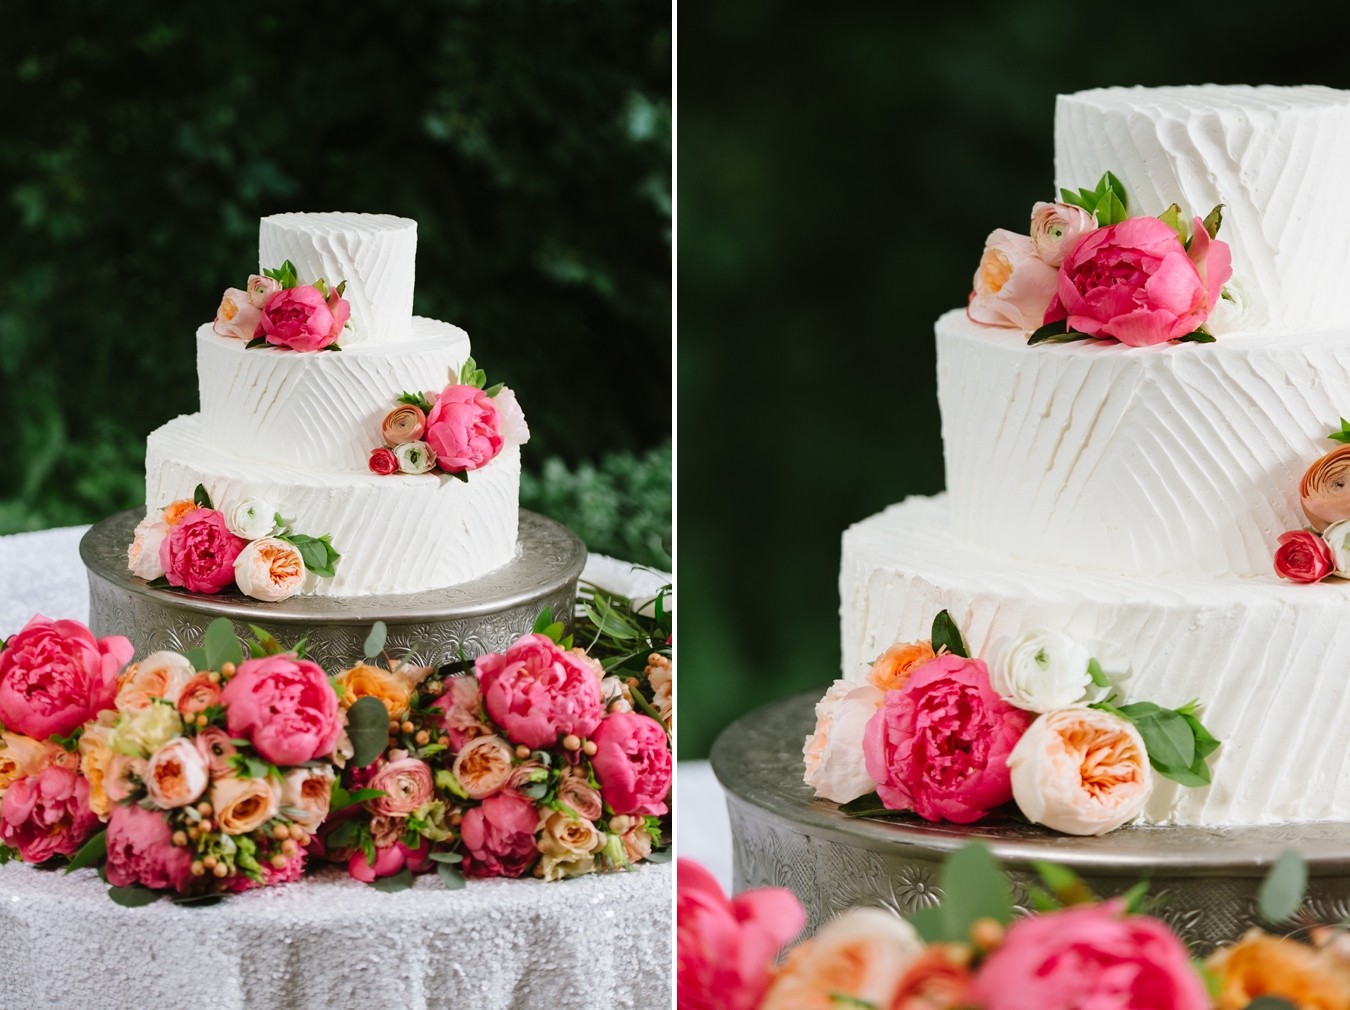 White Wedding Cake with Peonies and Flowers | Natalie Franke Photography